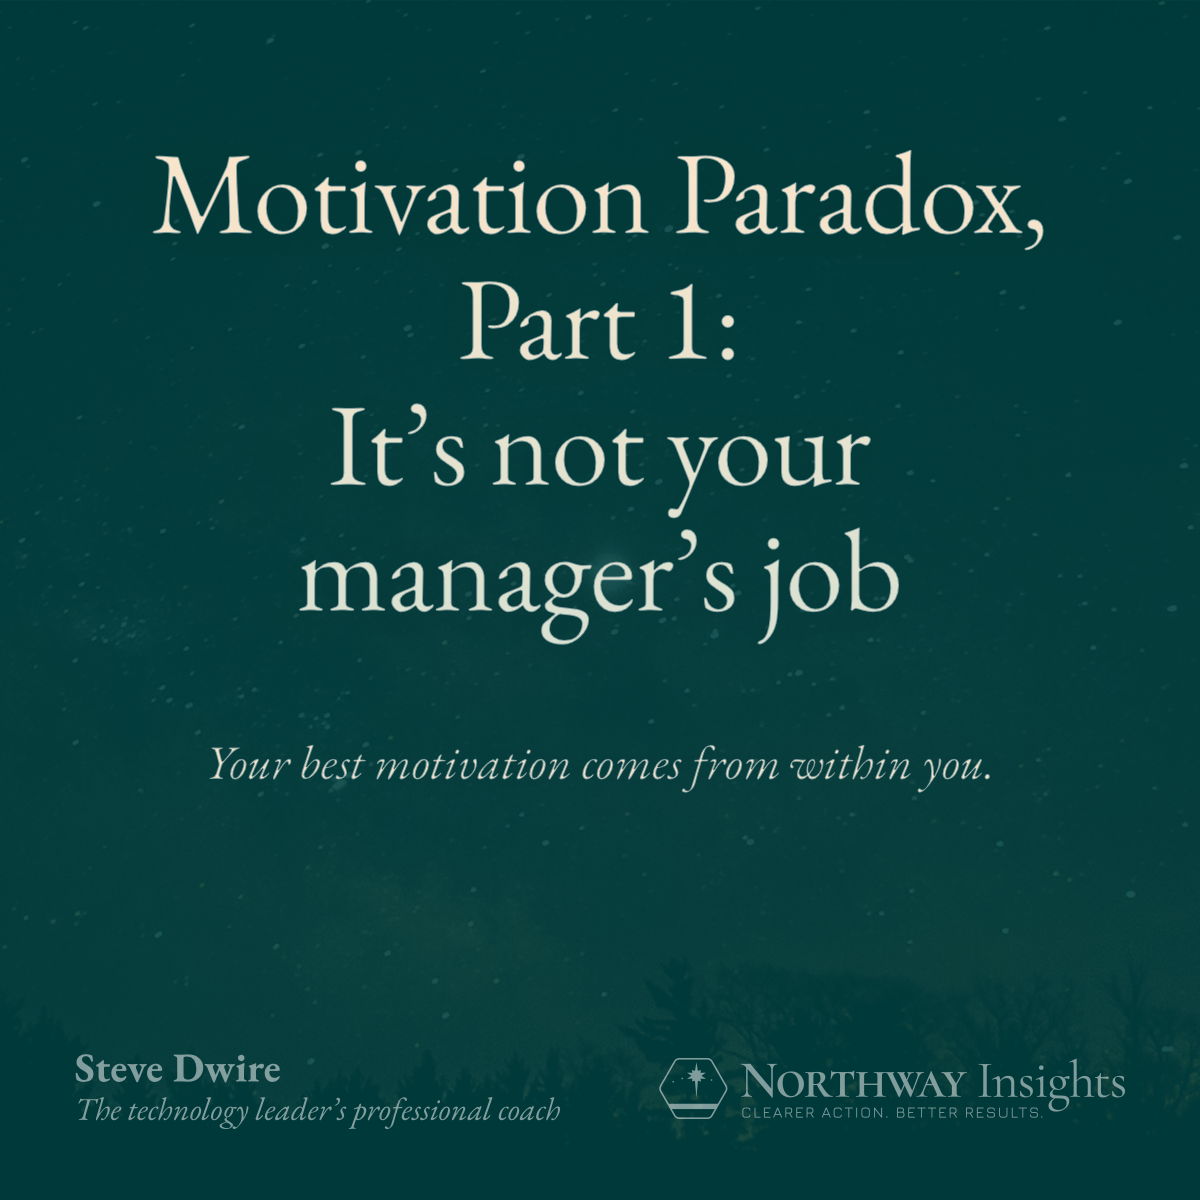 Motivation Paradox, Part 1: It’s not your manager’s job.